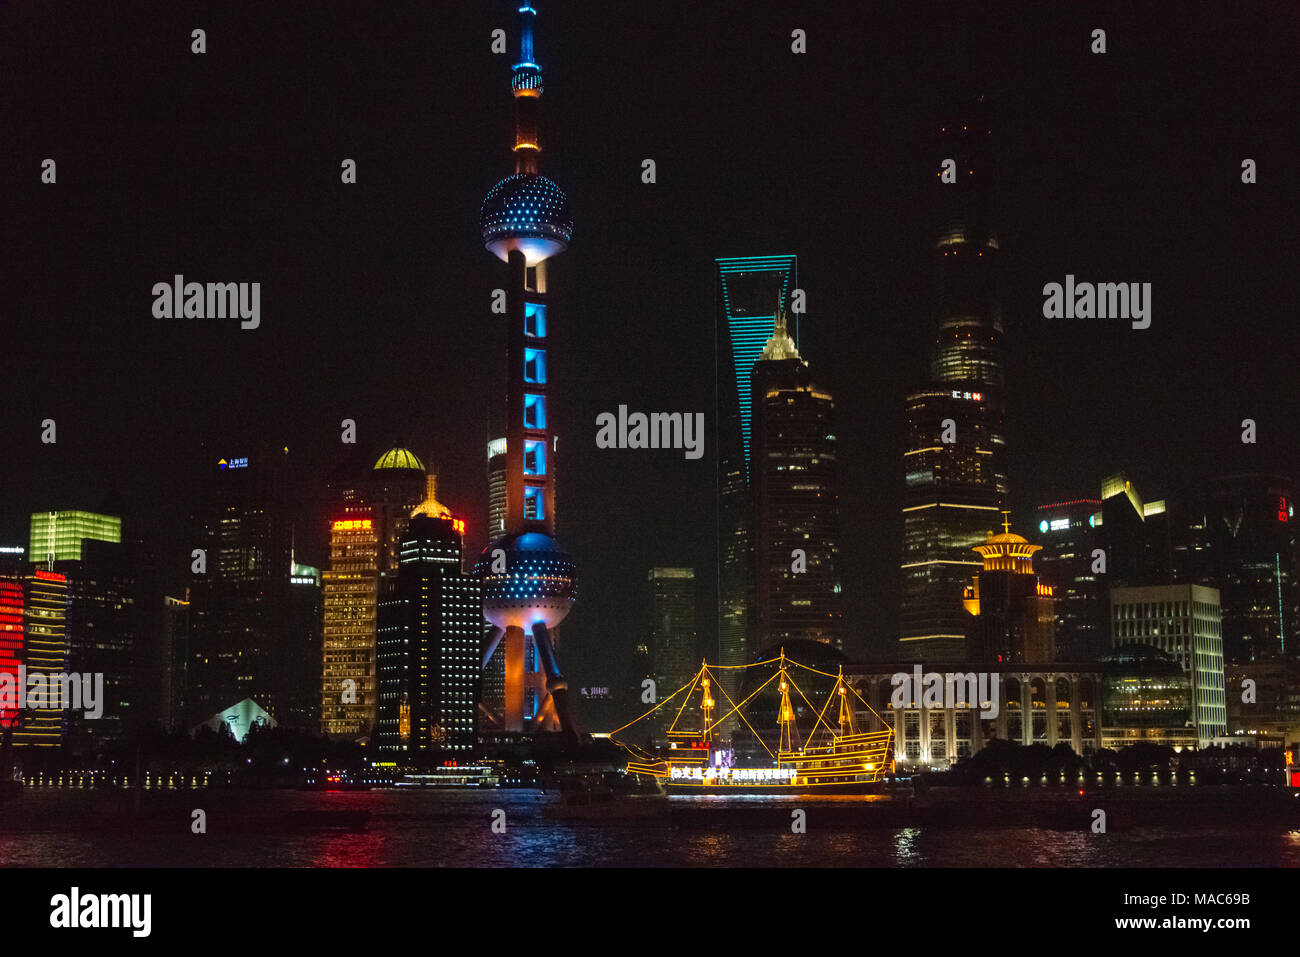 Night view of Pudong skyline and cruise boat on Huangpu River, Shanghai, China Stock Photo